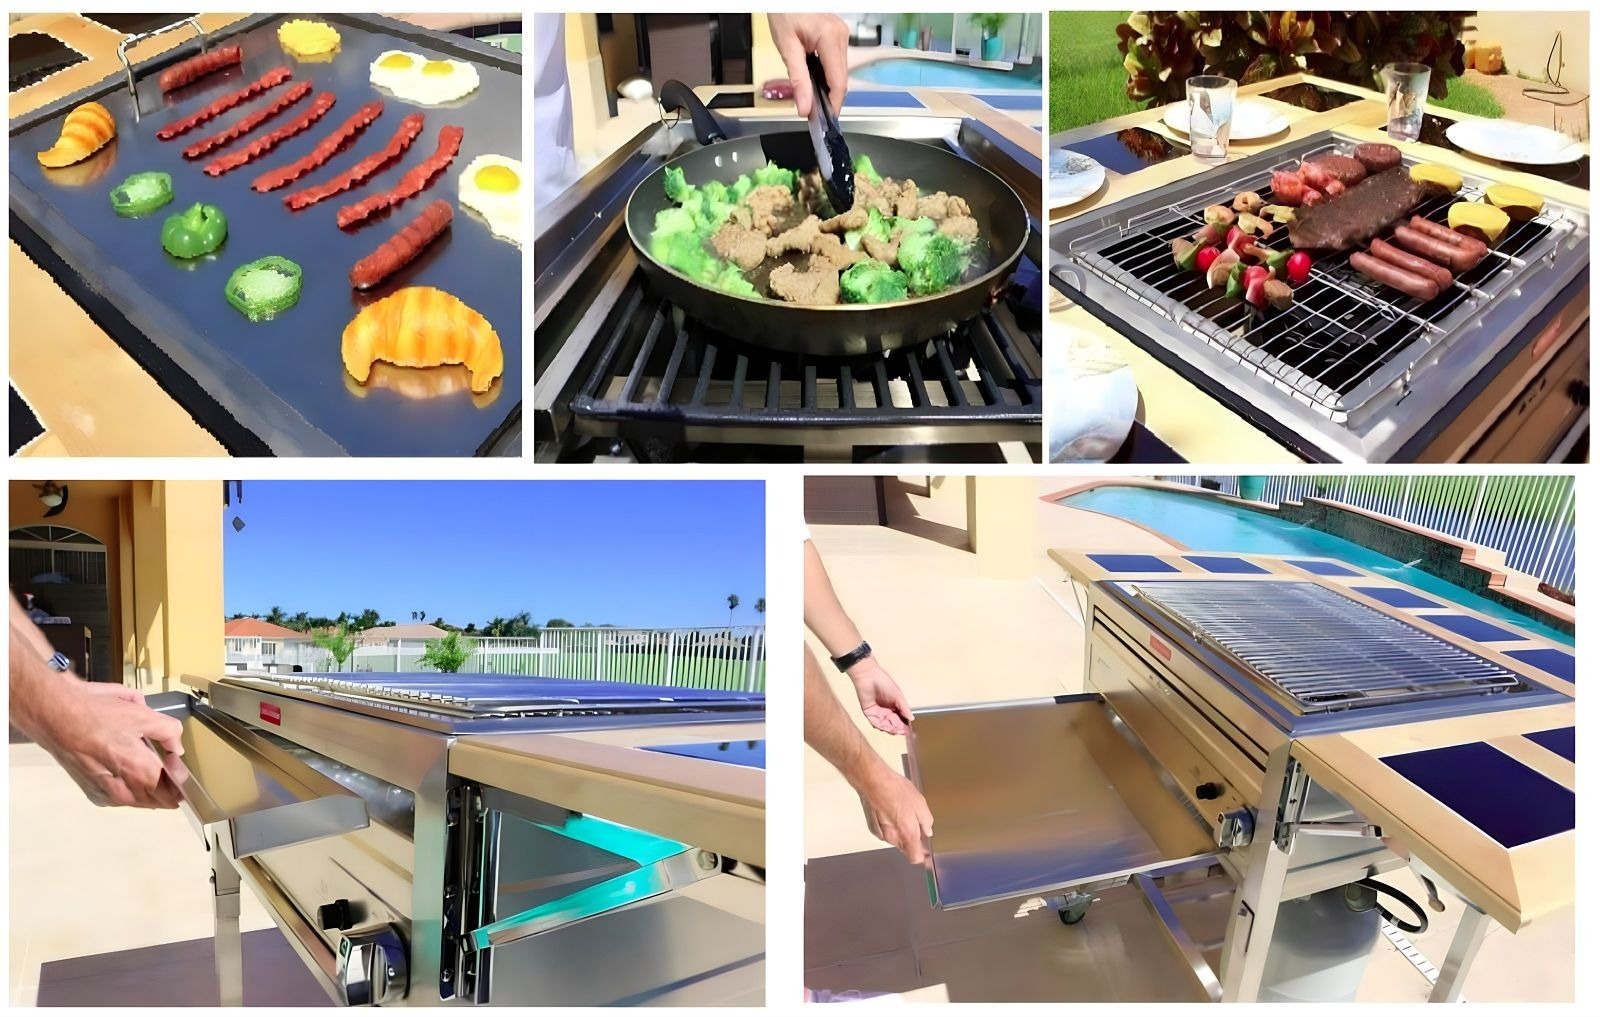 My Hibachi BBQ Built-In / Counter Top Grill - The Outdoor Appliance Store